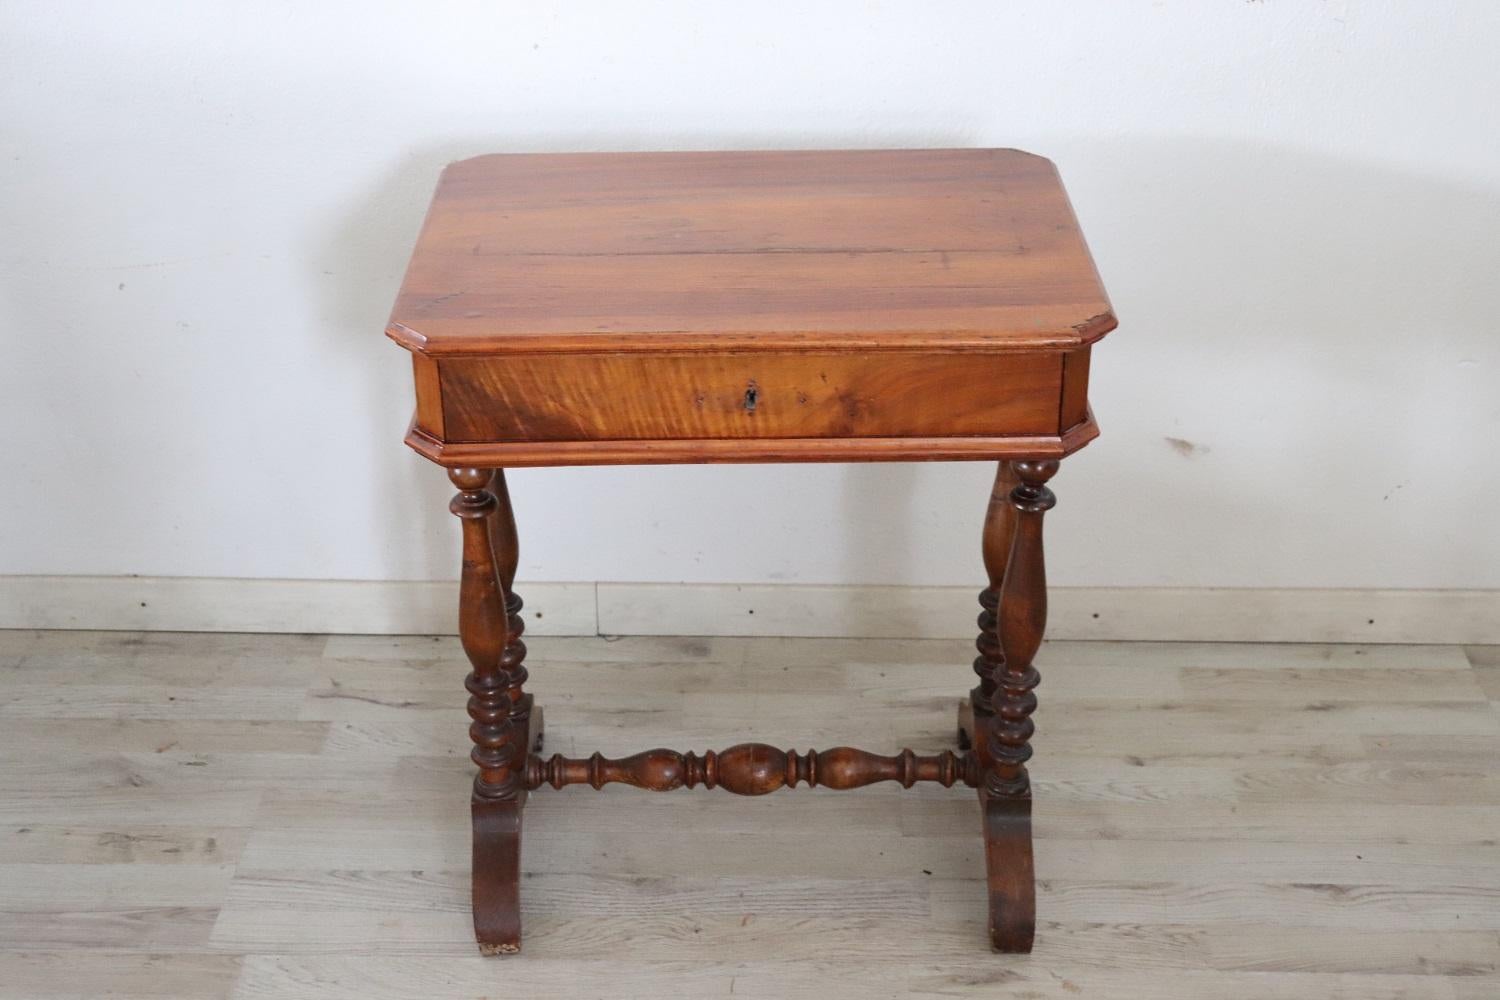 Lovely italian of the period Louis Philippe walnut side table. Featuring legs with refined turned decoration. On the front a drawer internally divided into small compartments. A small table that can be used in different rooms of the house: in the